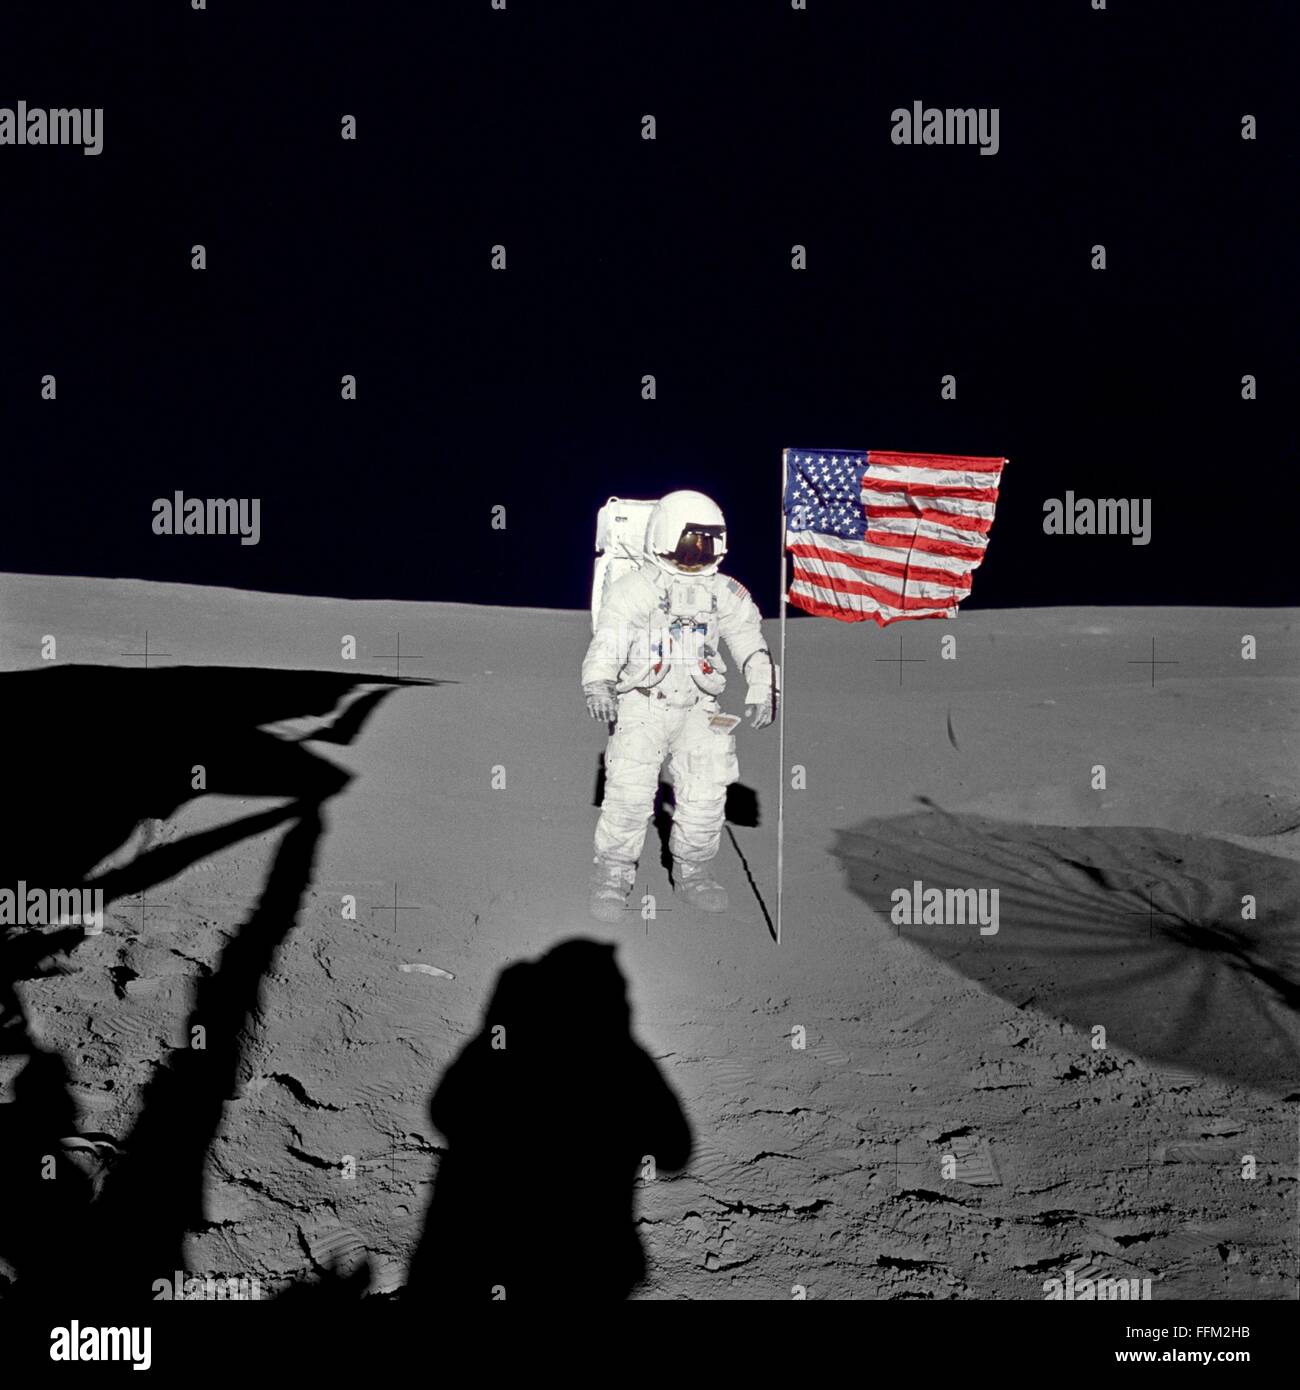 NASA astronaut Edgar D. Mitchell, Apollo 14 lunar module pilot stands by the U.S. flag on the lunar surface during the early moments of the mission's first spacewalk February 5, 1971. Mission commander Alan B. Shepard Jr. is taking the photo in the Fra Mauro region of the moon. Stock Photo